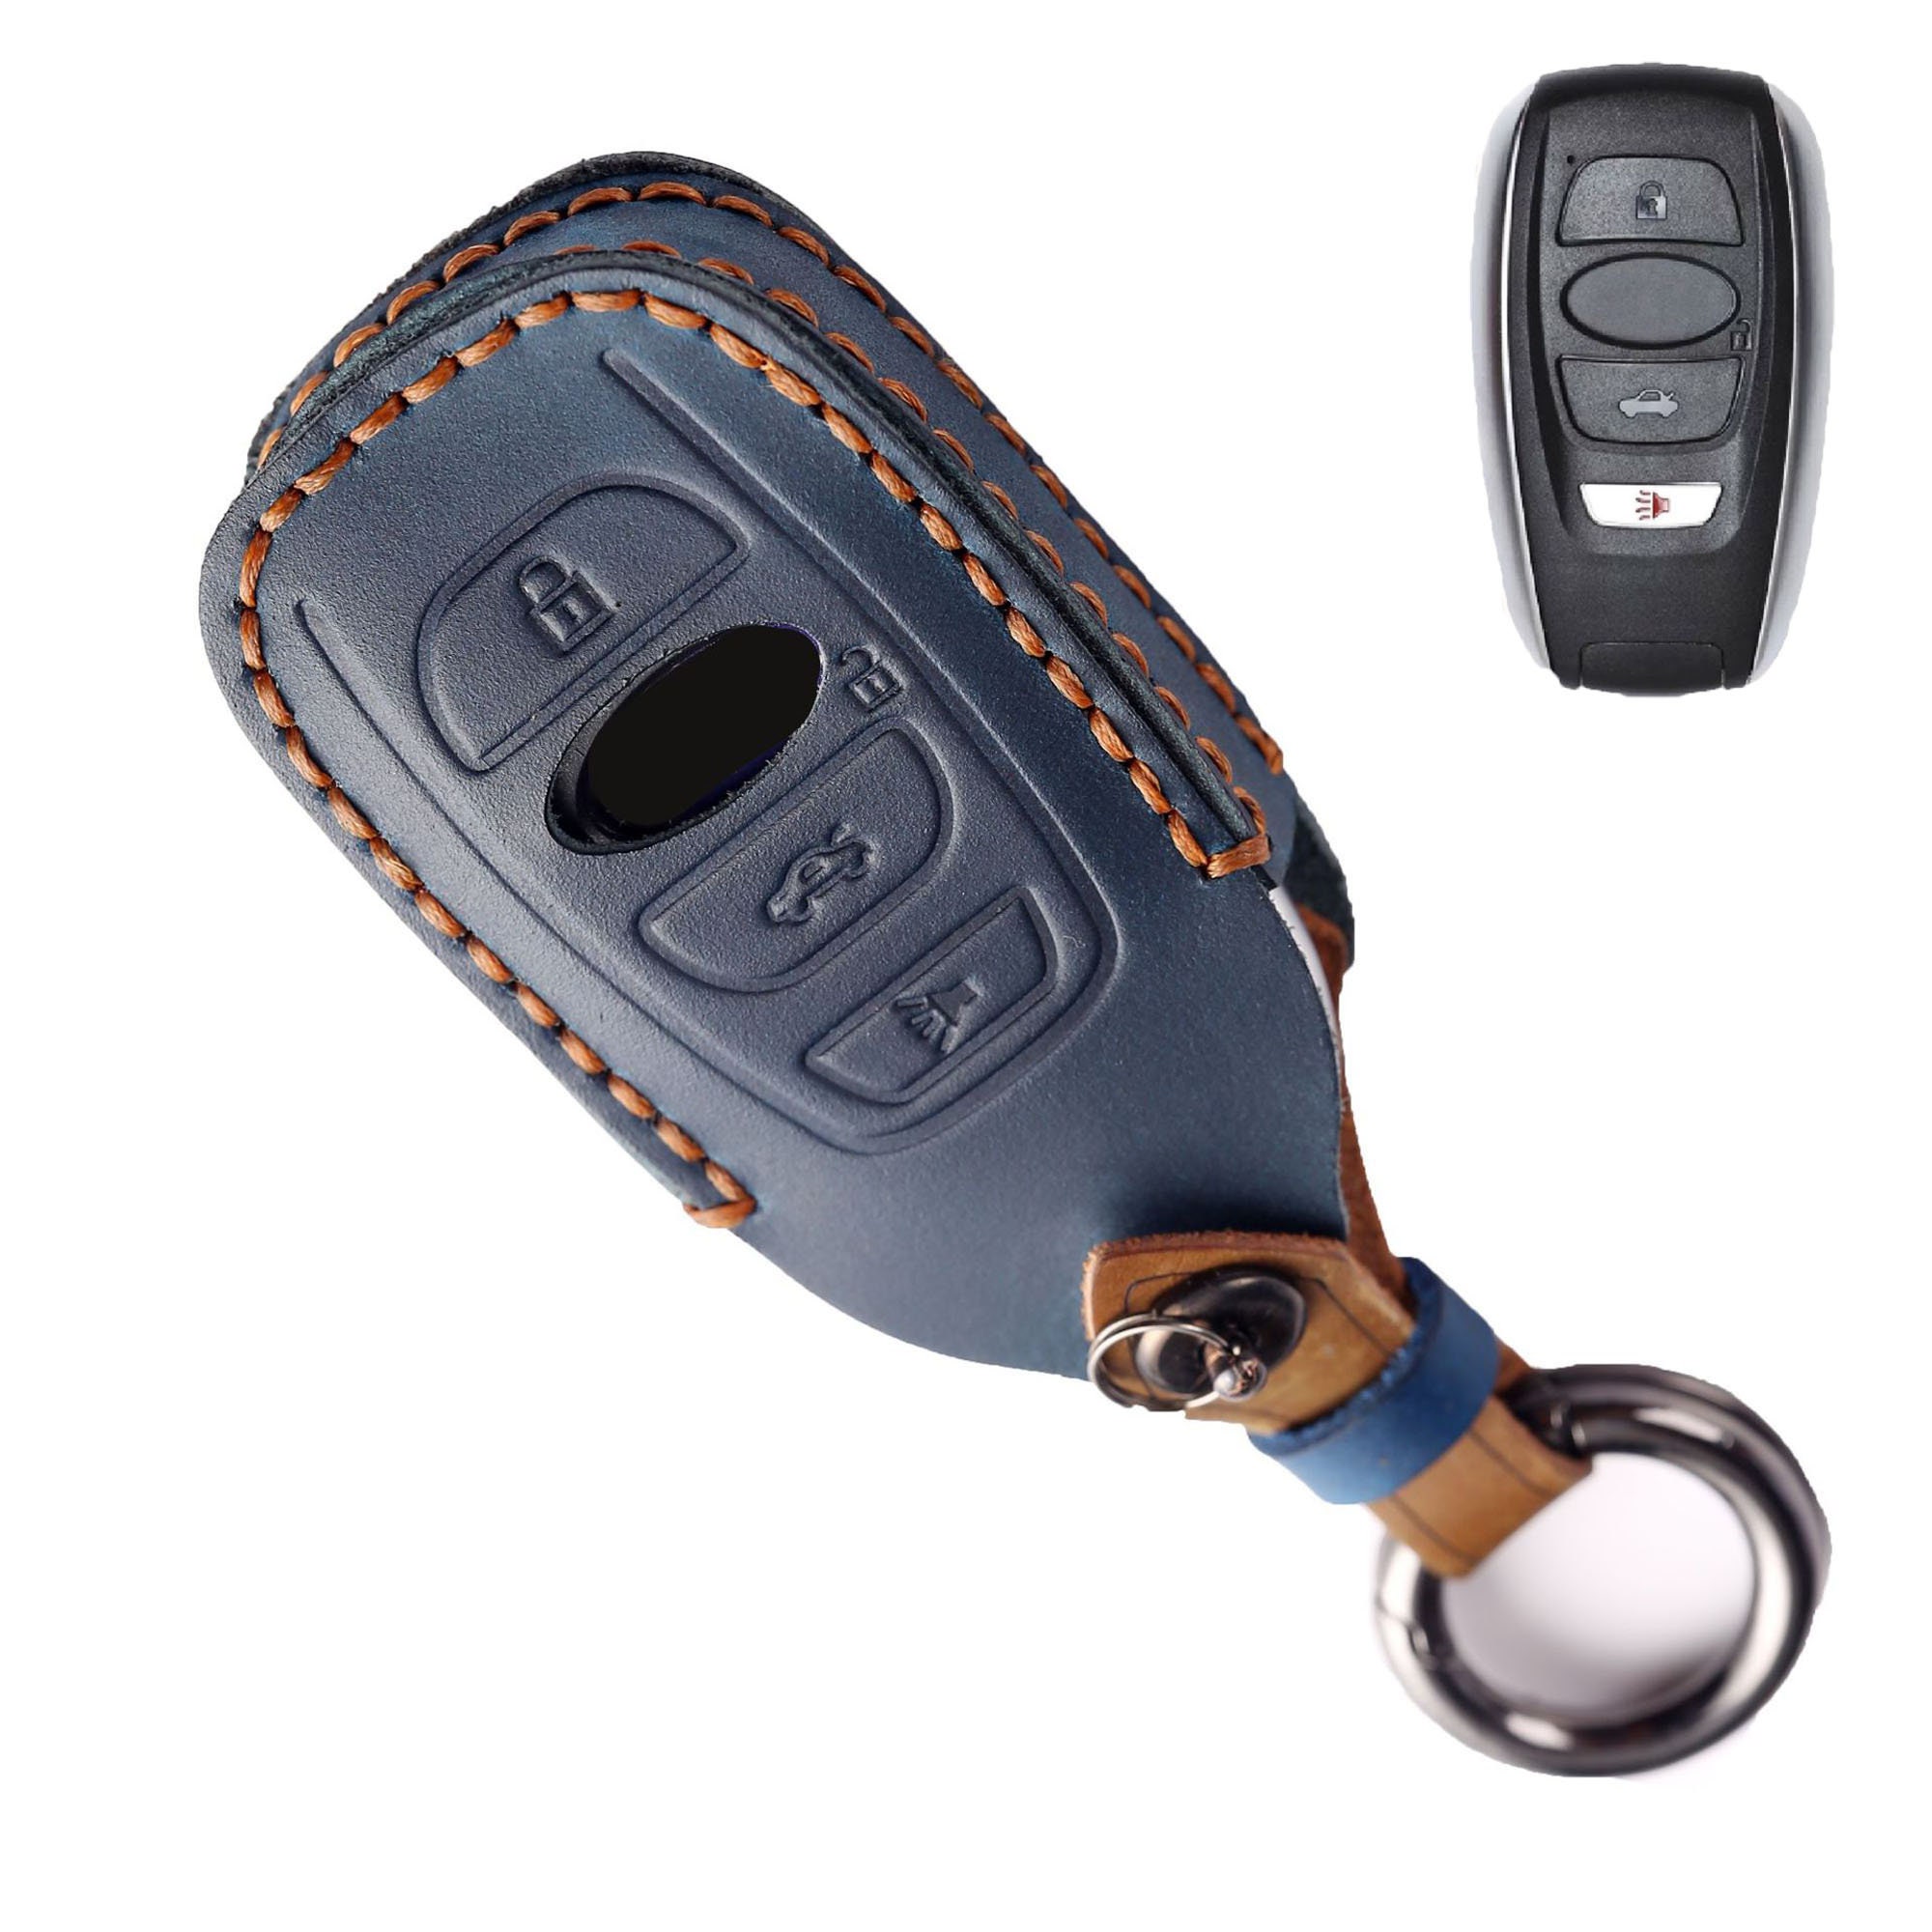 2022 subaru key fob cover leather, Genuine Leather Key Fob Case protector  for Subaru Ascent Outback with leather keychain